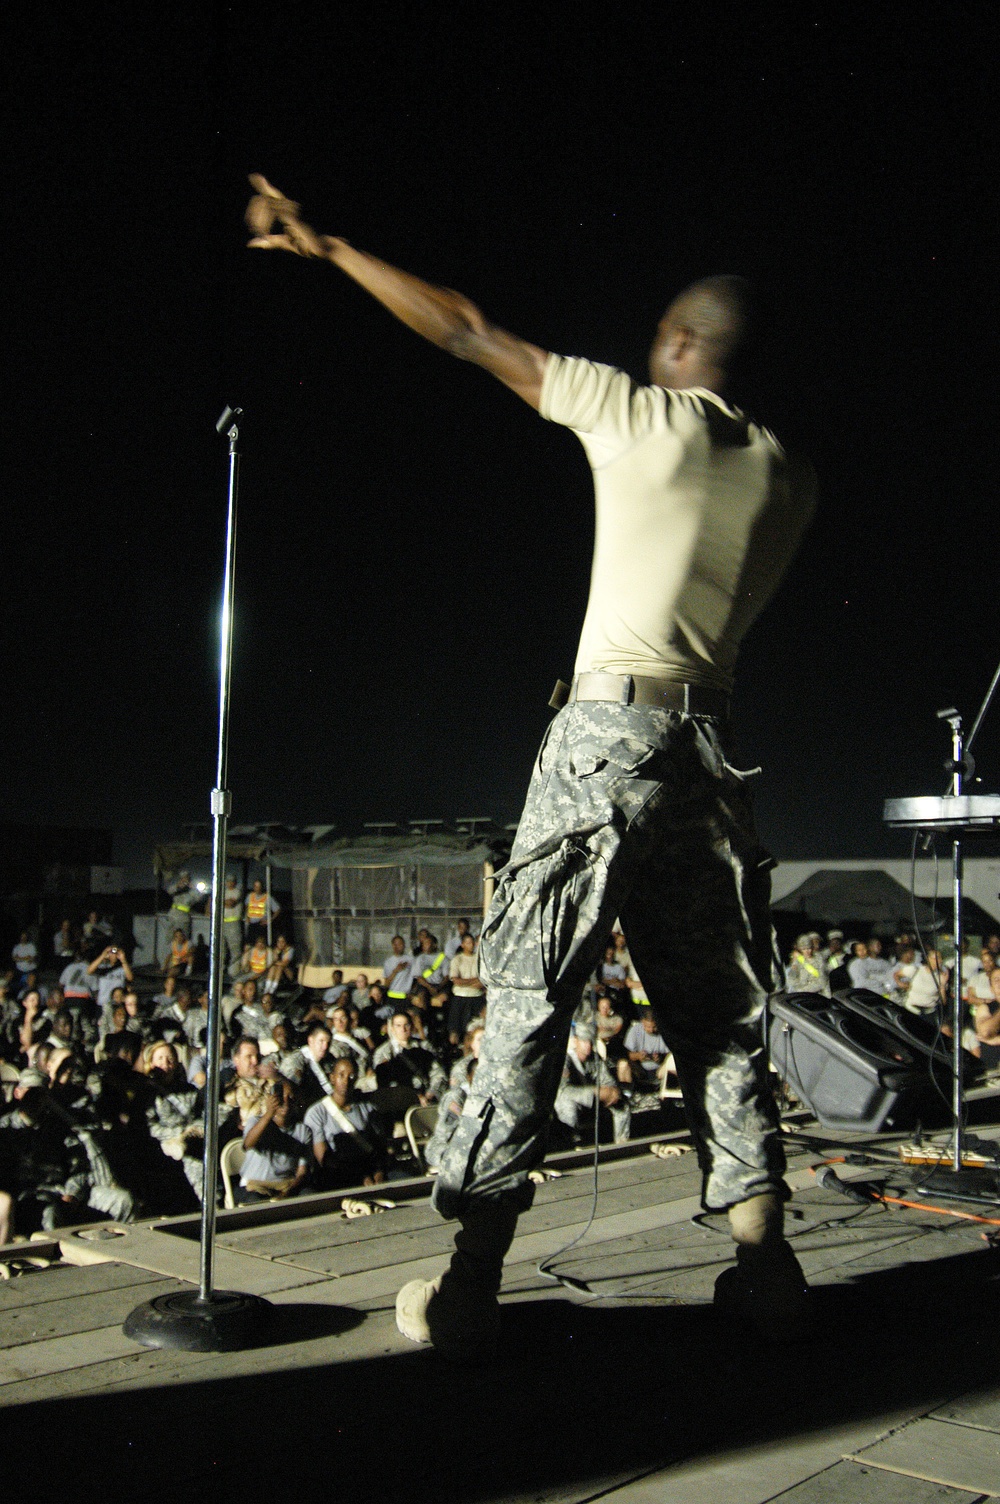 A  cheering audience's roar crowns  Baton Rouge Reserve Soldier top talent in Haiti